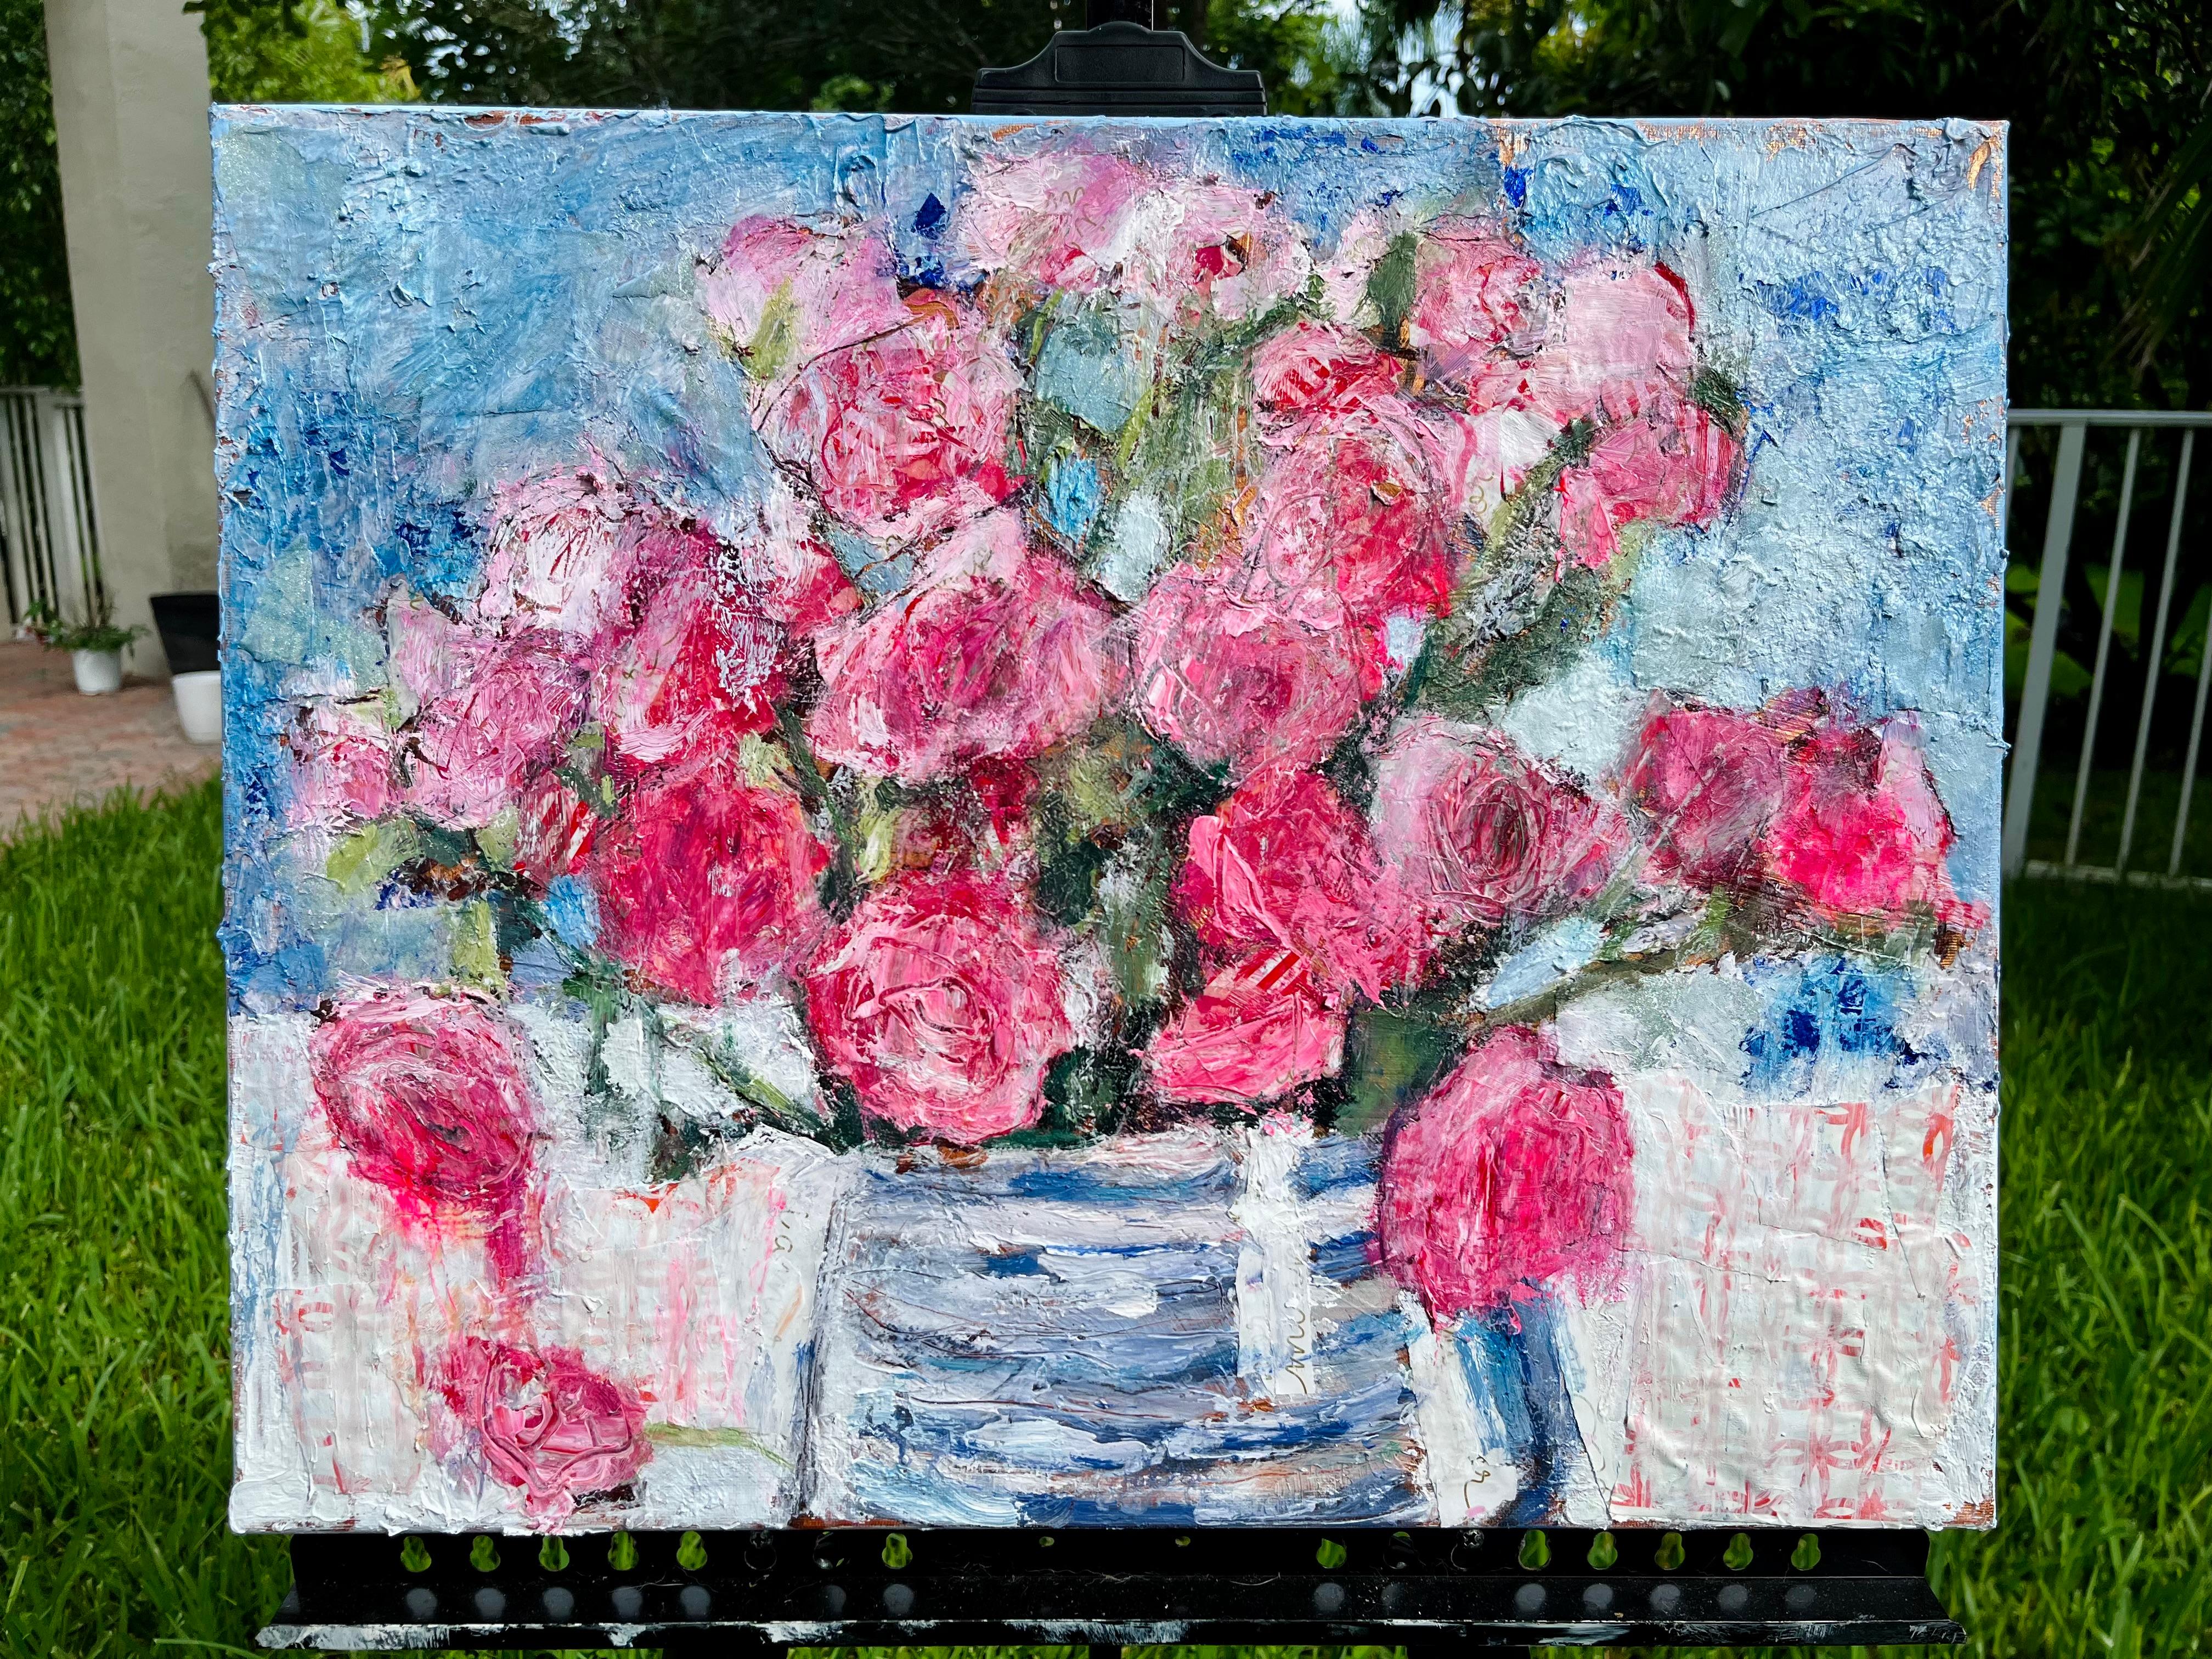 <p>Artist Comments<br>Artist Nava Lundy presents an exquisite arrangement of stunning flowers. The buds spread in different directions, diffusing vibrant pops of textured pink hues. 